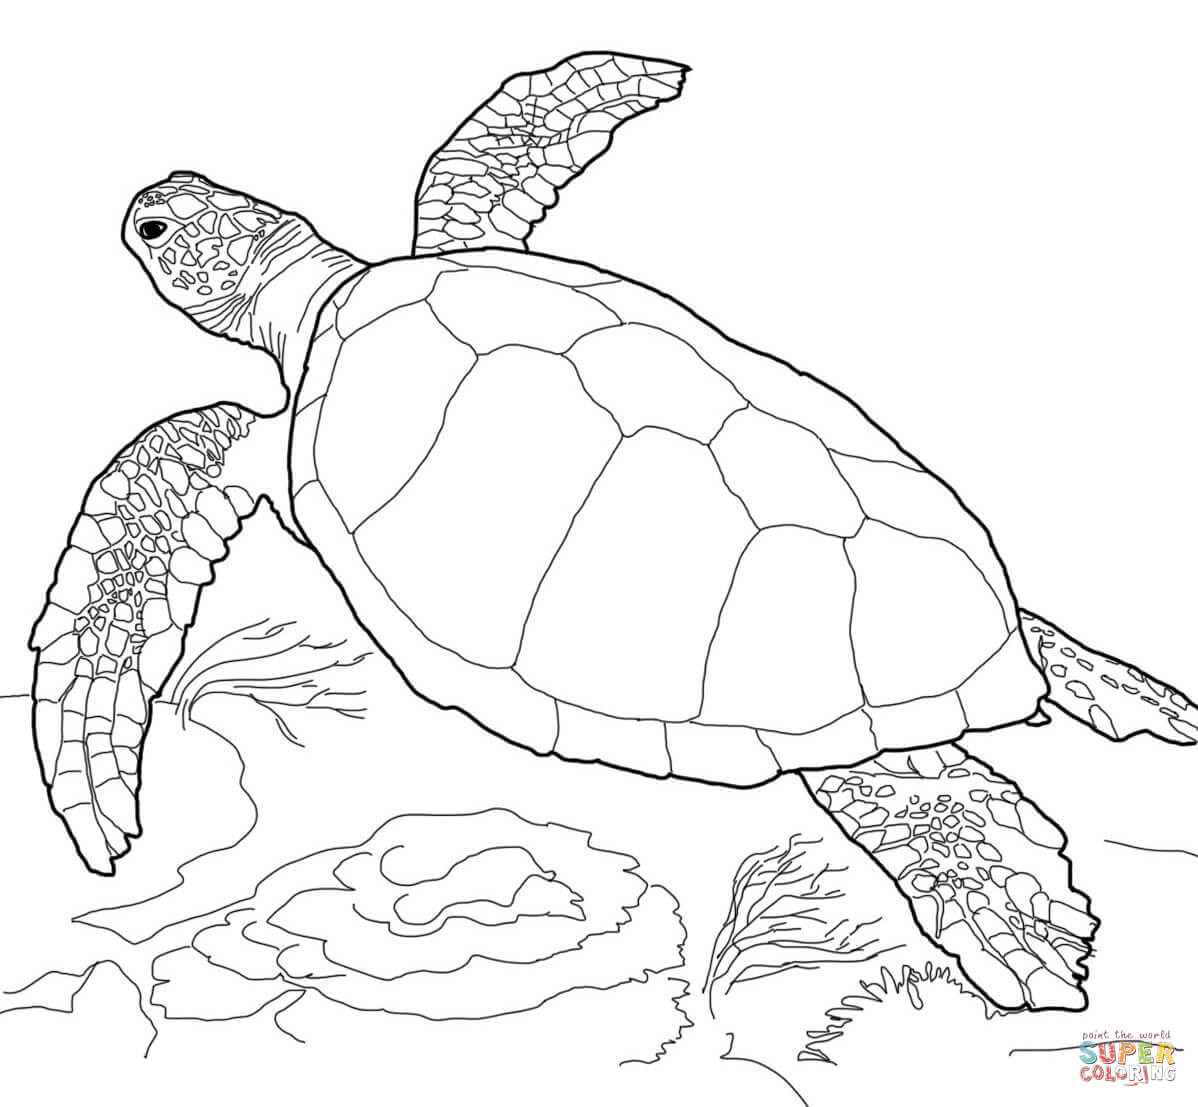 Sea Turtle coloring page | Free Printable Coloring Pages